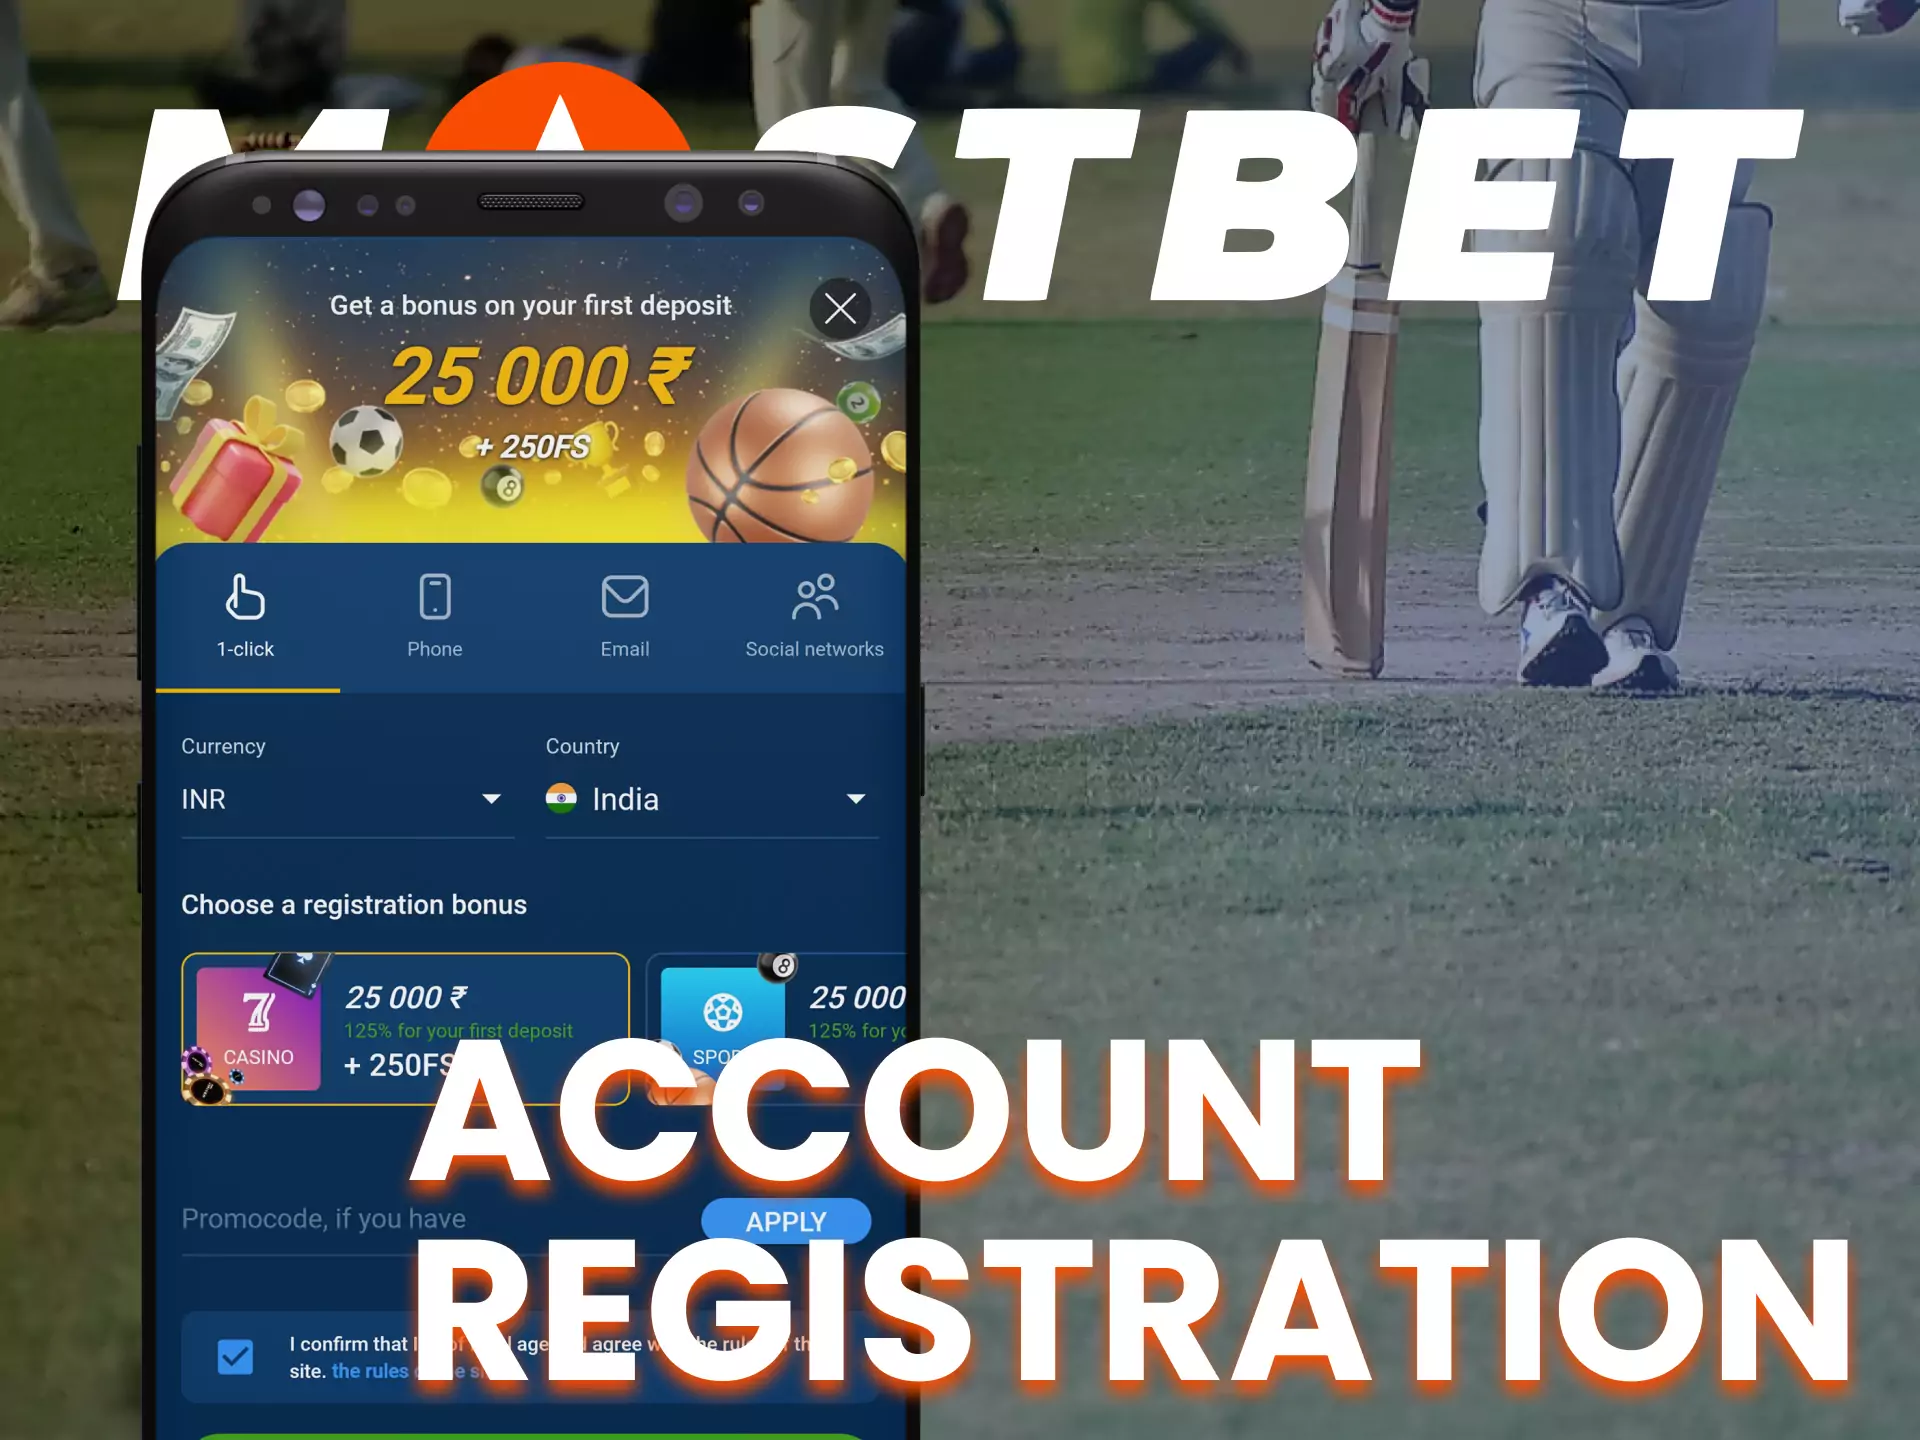 On the Mostbet app, go through a simple registration process.